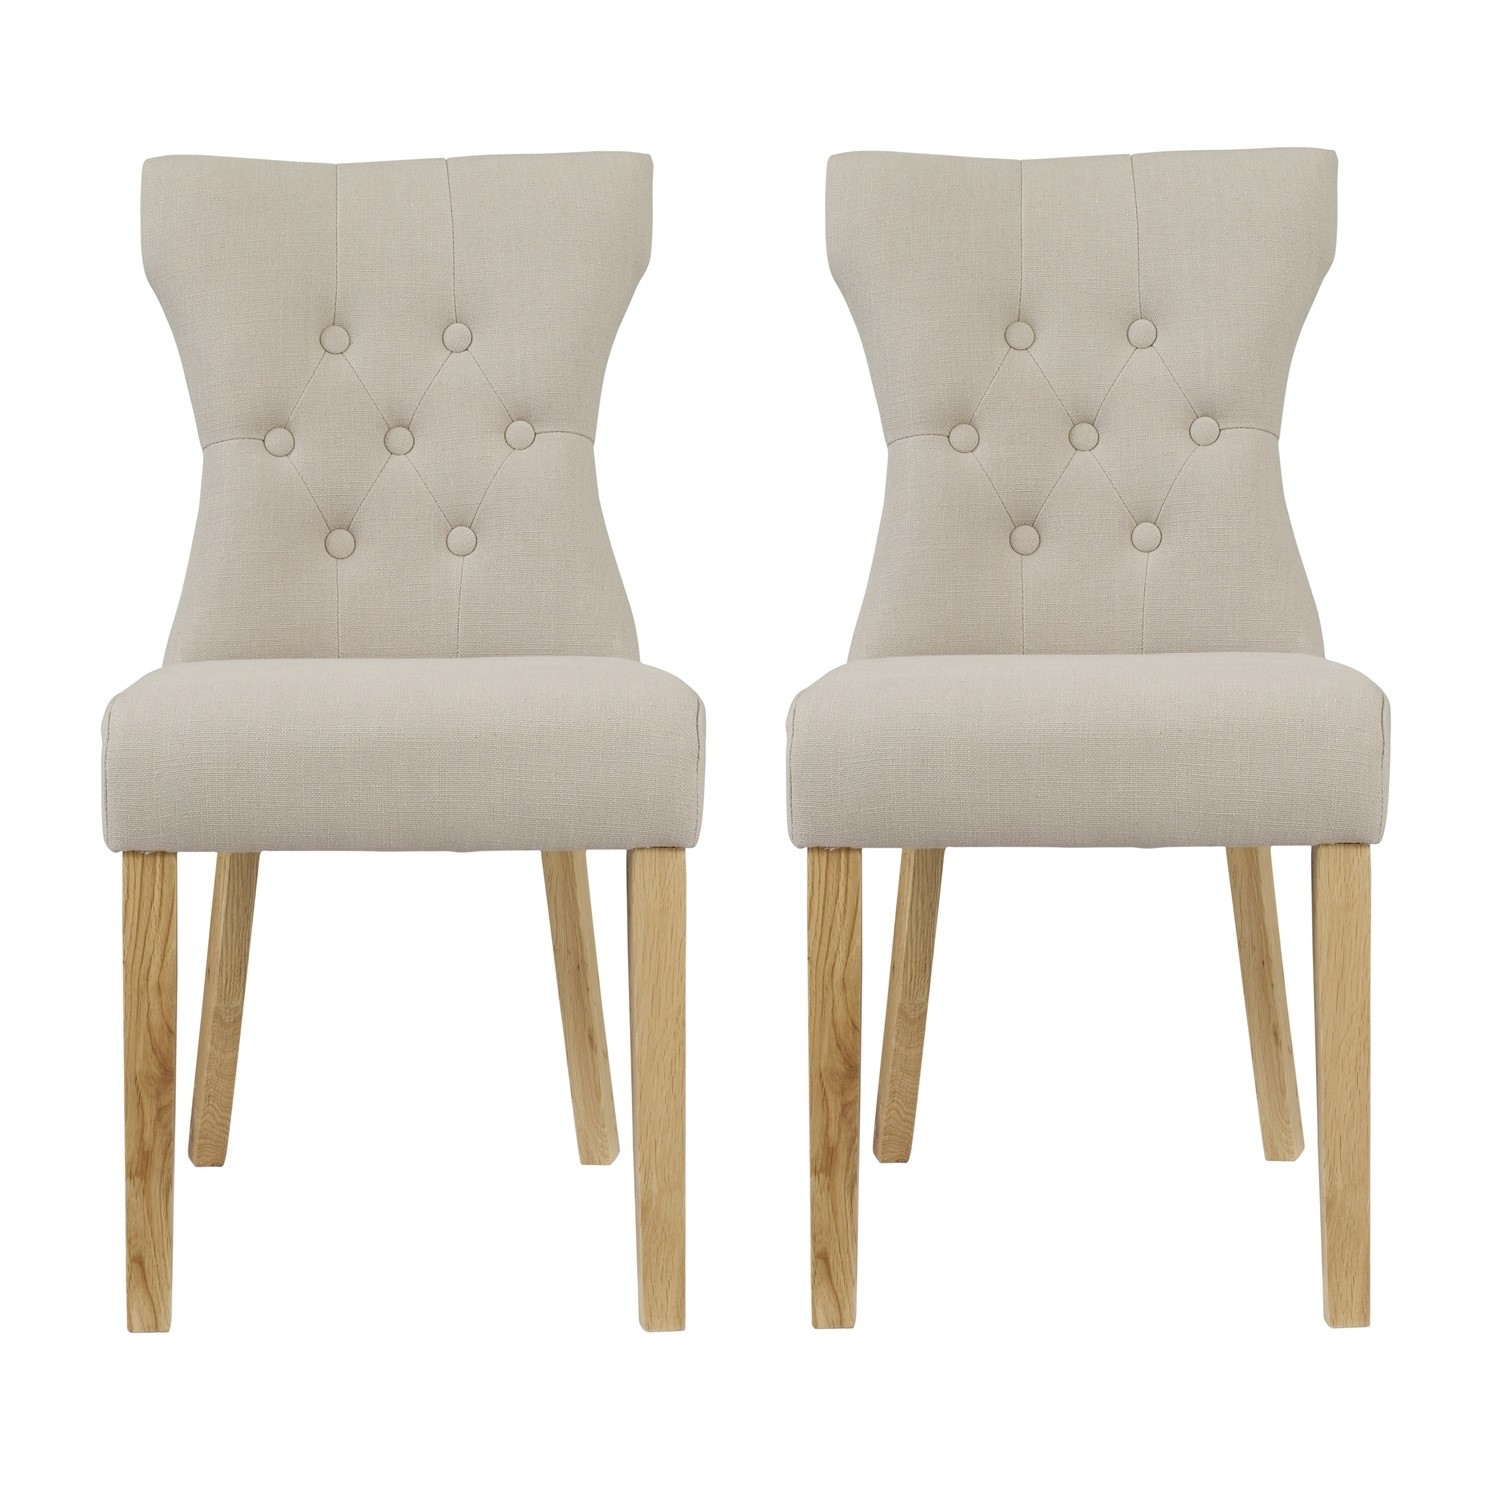 Photo of Set of 2 beige fabric dining chairs - naples